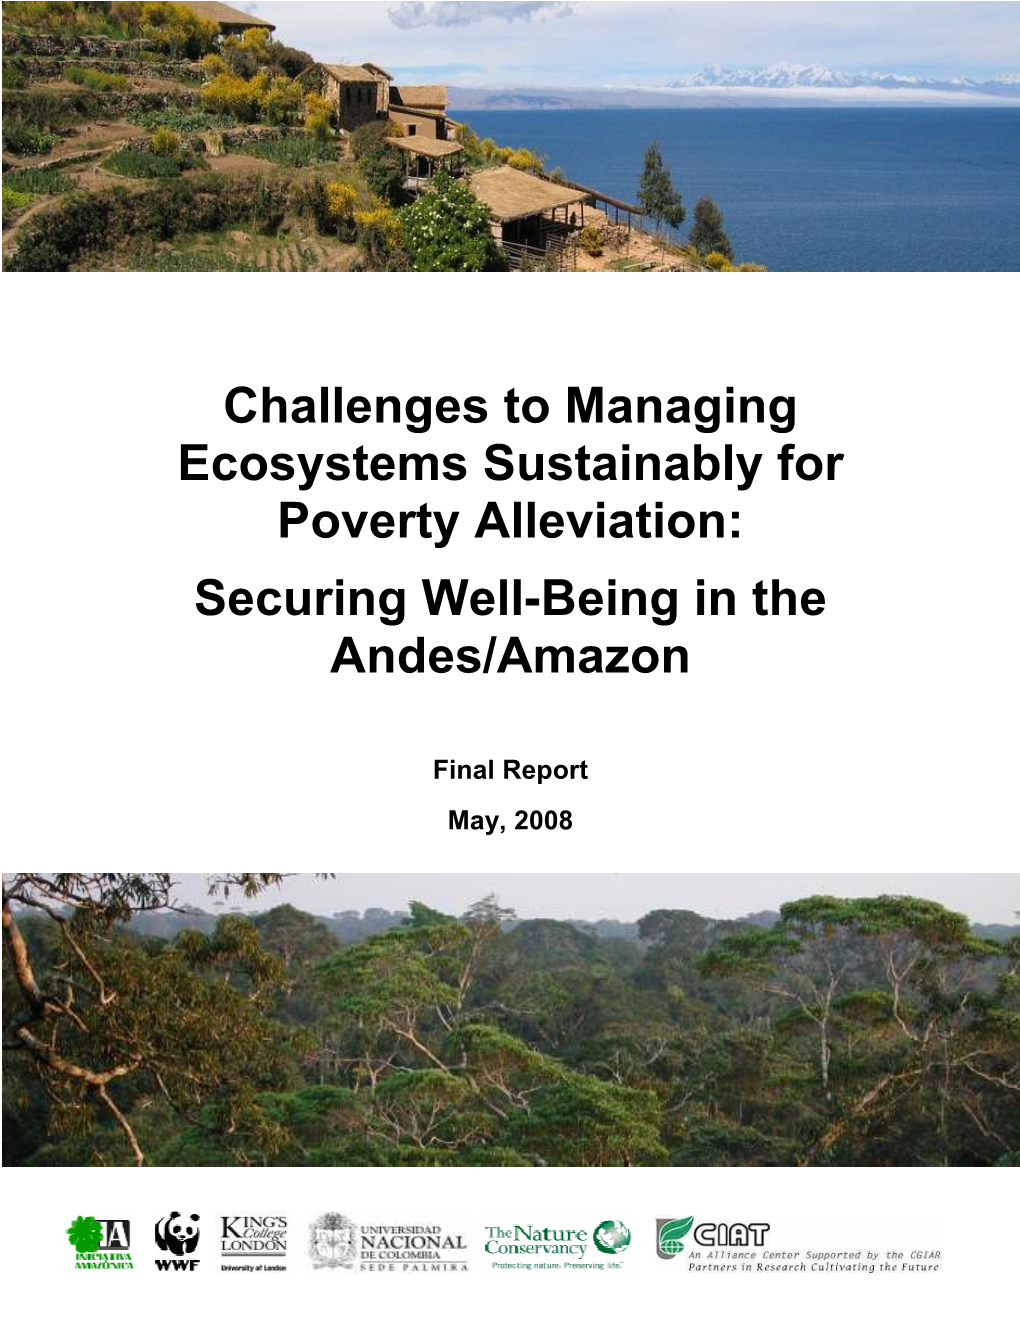 Challenges to Managing Ecosystems Sustainably for Poverty Alleviation: Securing Well-Being in the Andes/Amazon